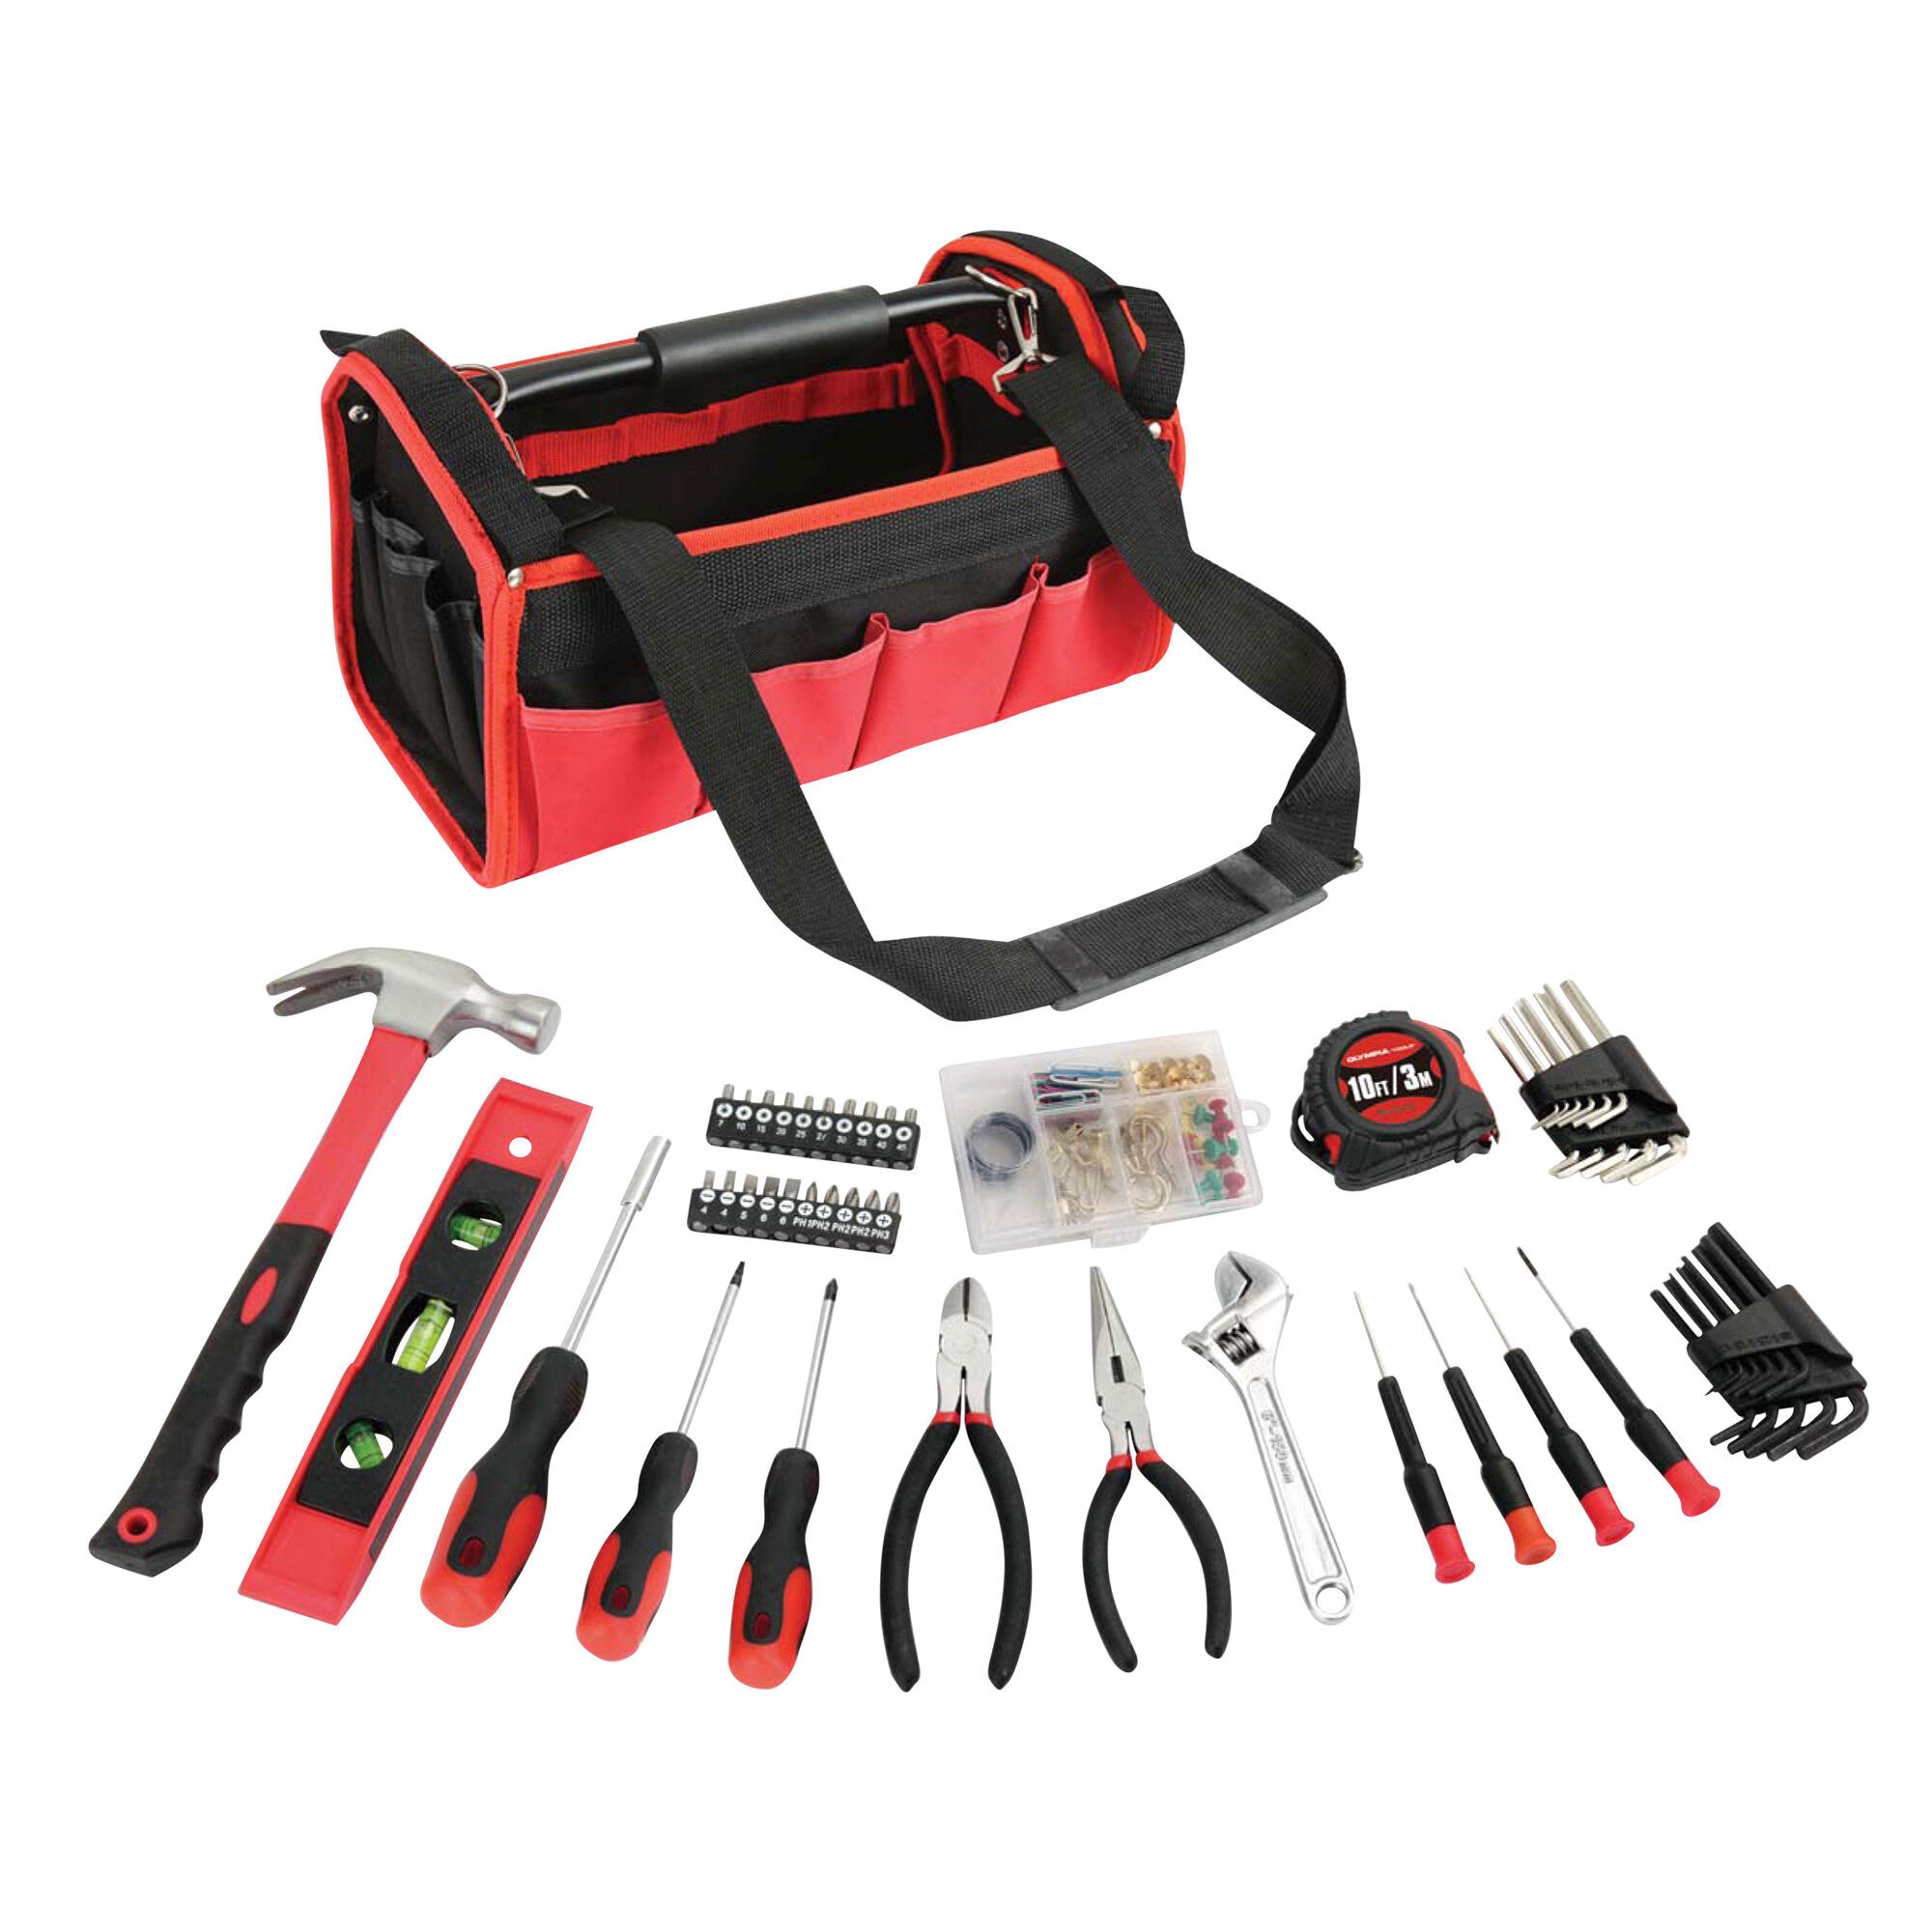 Olympia Tools 83-142 56-Piece Tool Set with 20-Pocket Carrying Case